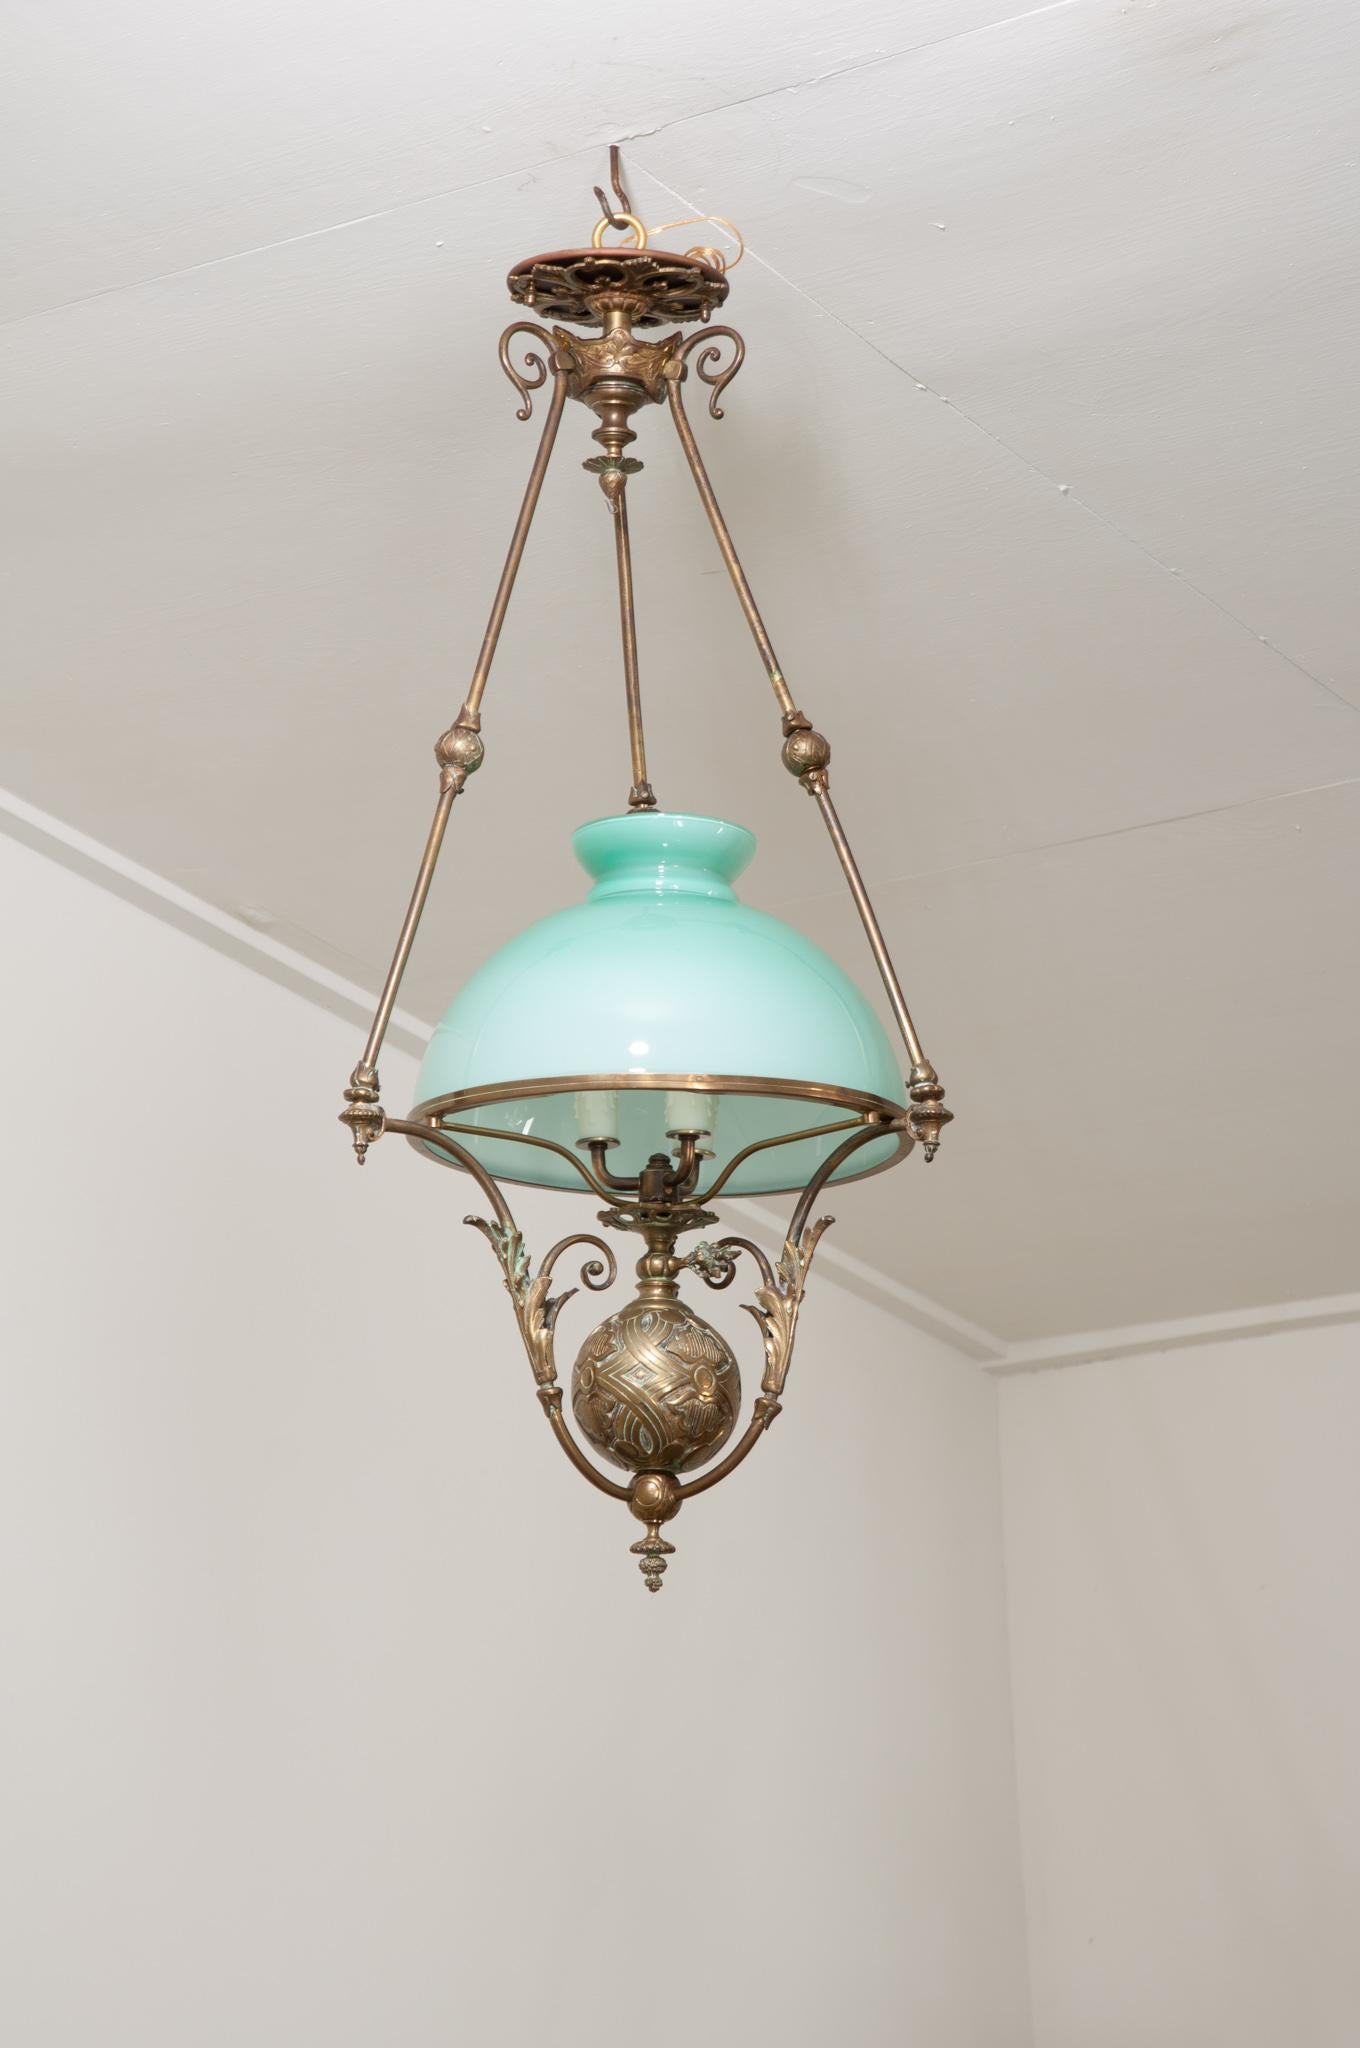 A 19th century French Beaux-Arts style brass and glass oil lamp chandelier with large aquamarine blue glass dome shade. Three scrolling cast brass arms with decorative finial centers descend from an ornate cast brass rosette and detailed cast brass